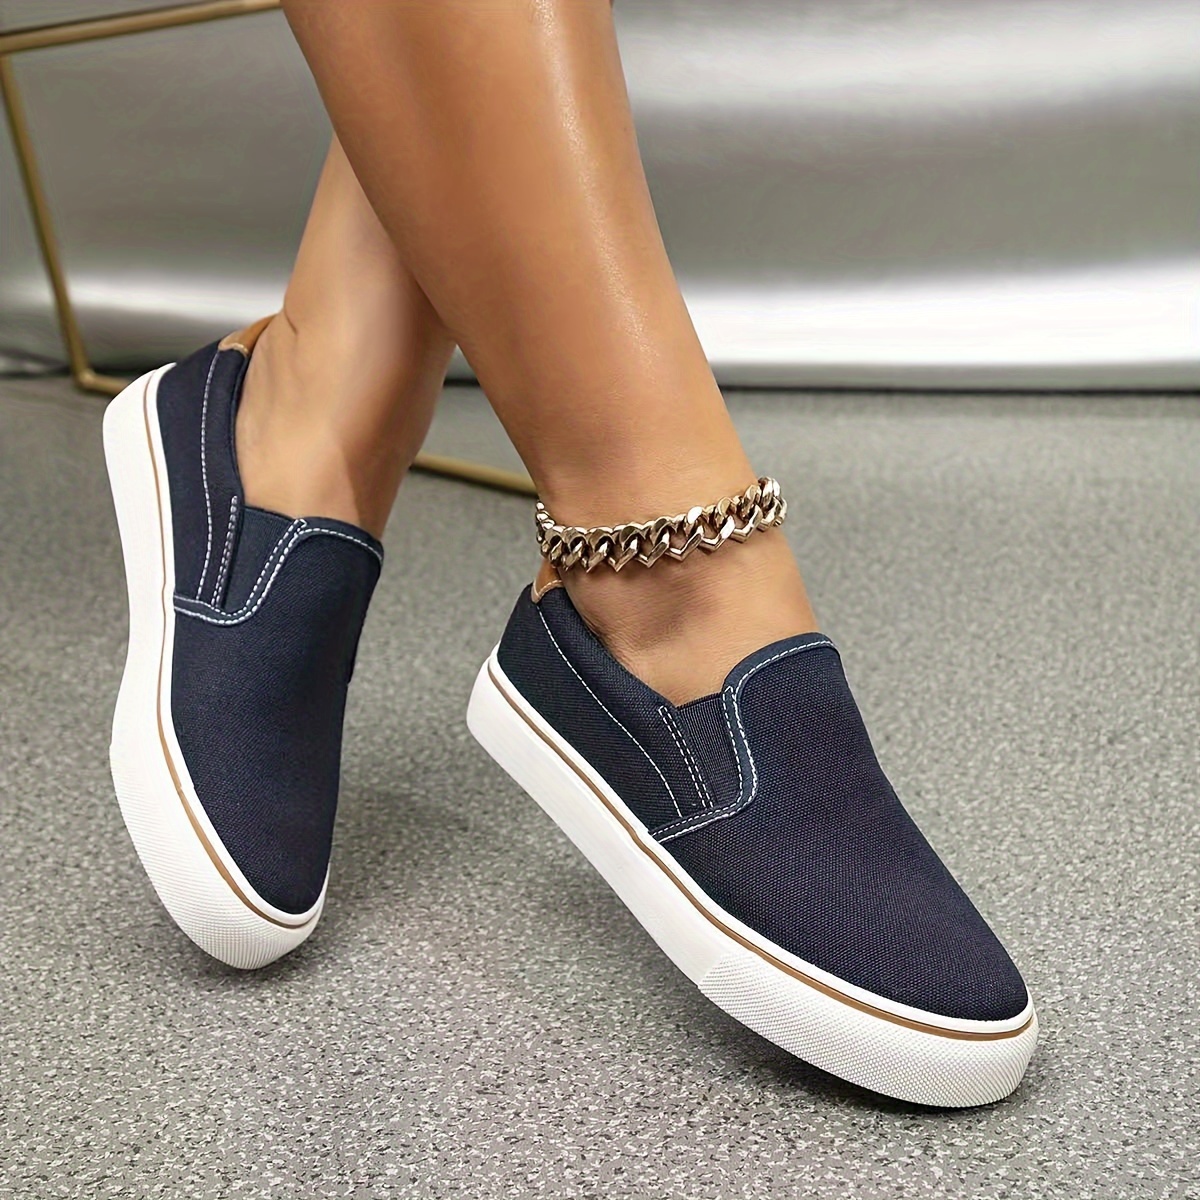 womens unisex solid color canvas shoes casual slip on outdoor shoes comfortable low top shoes details 14